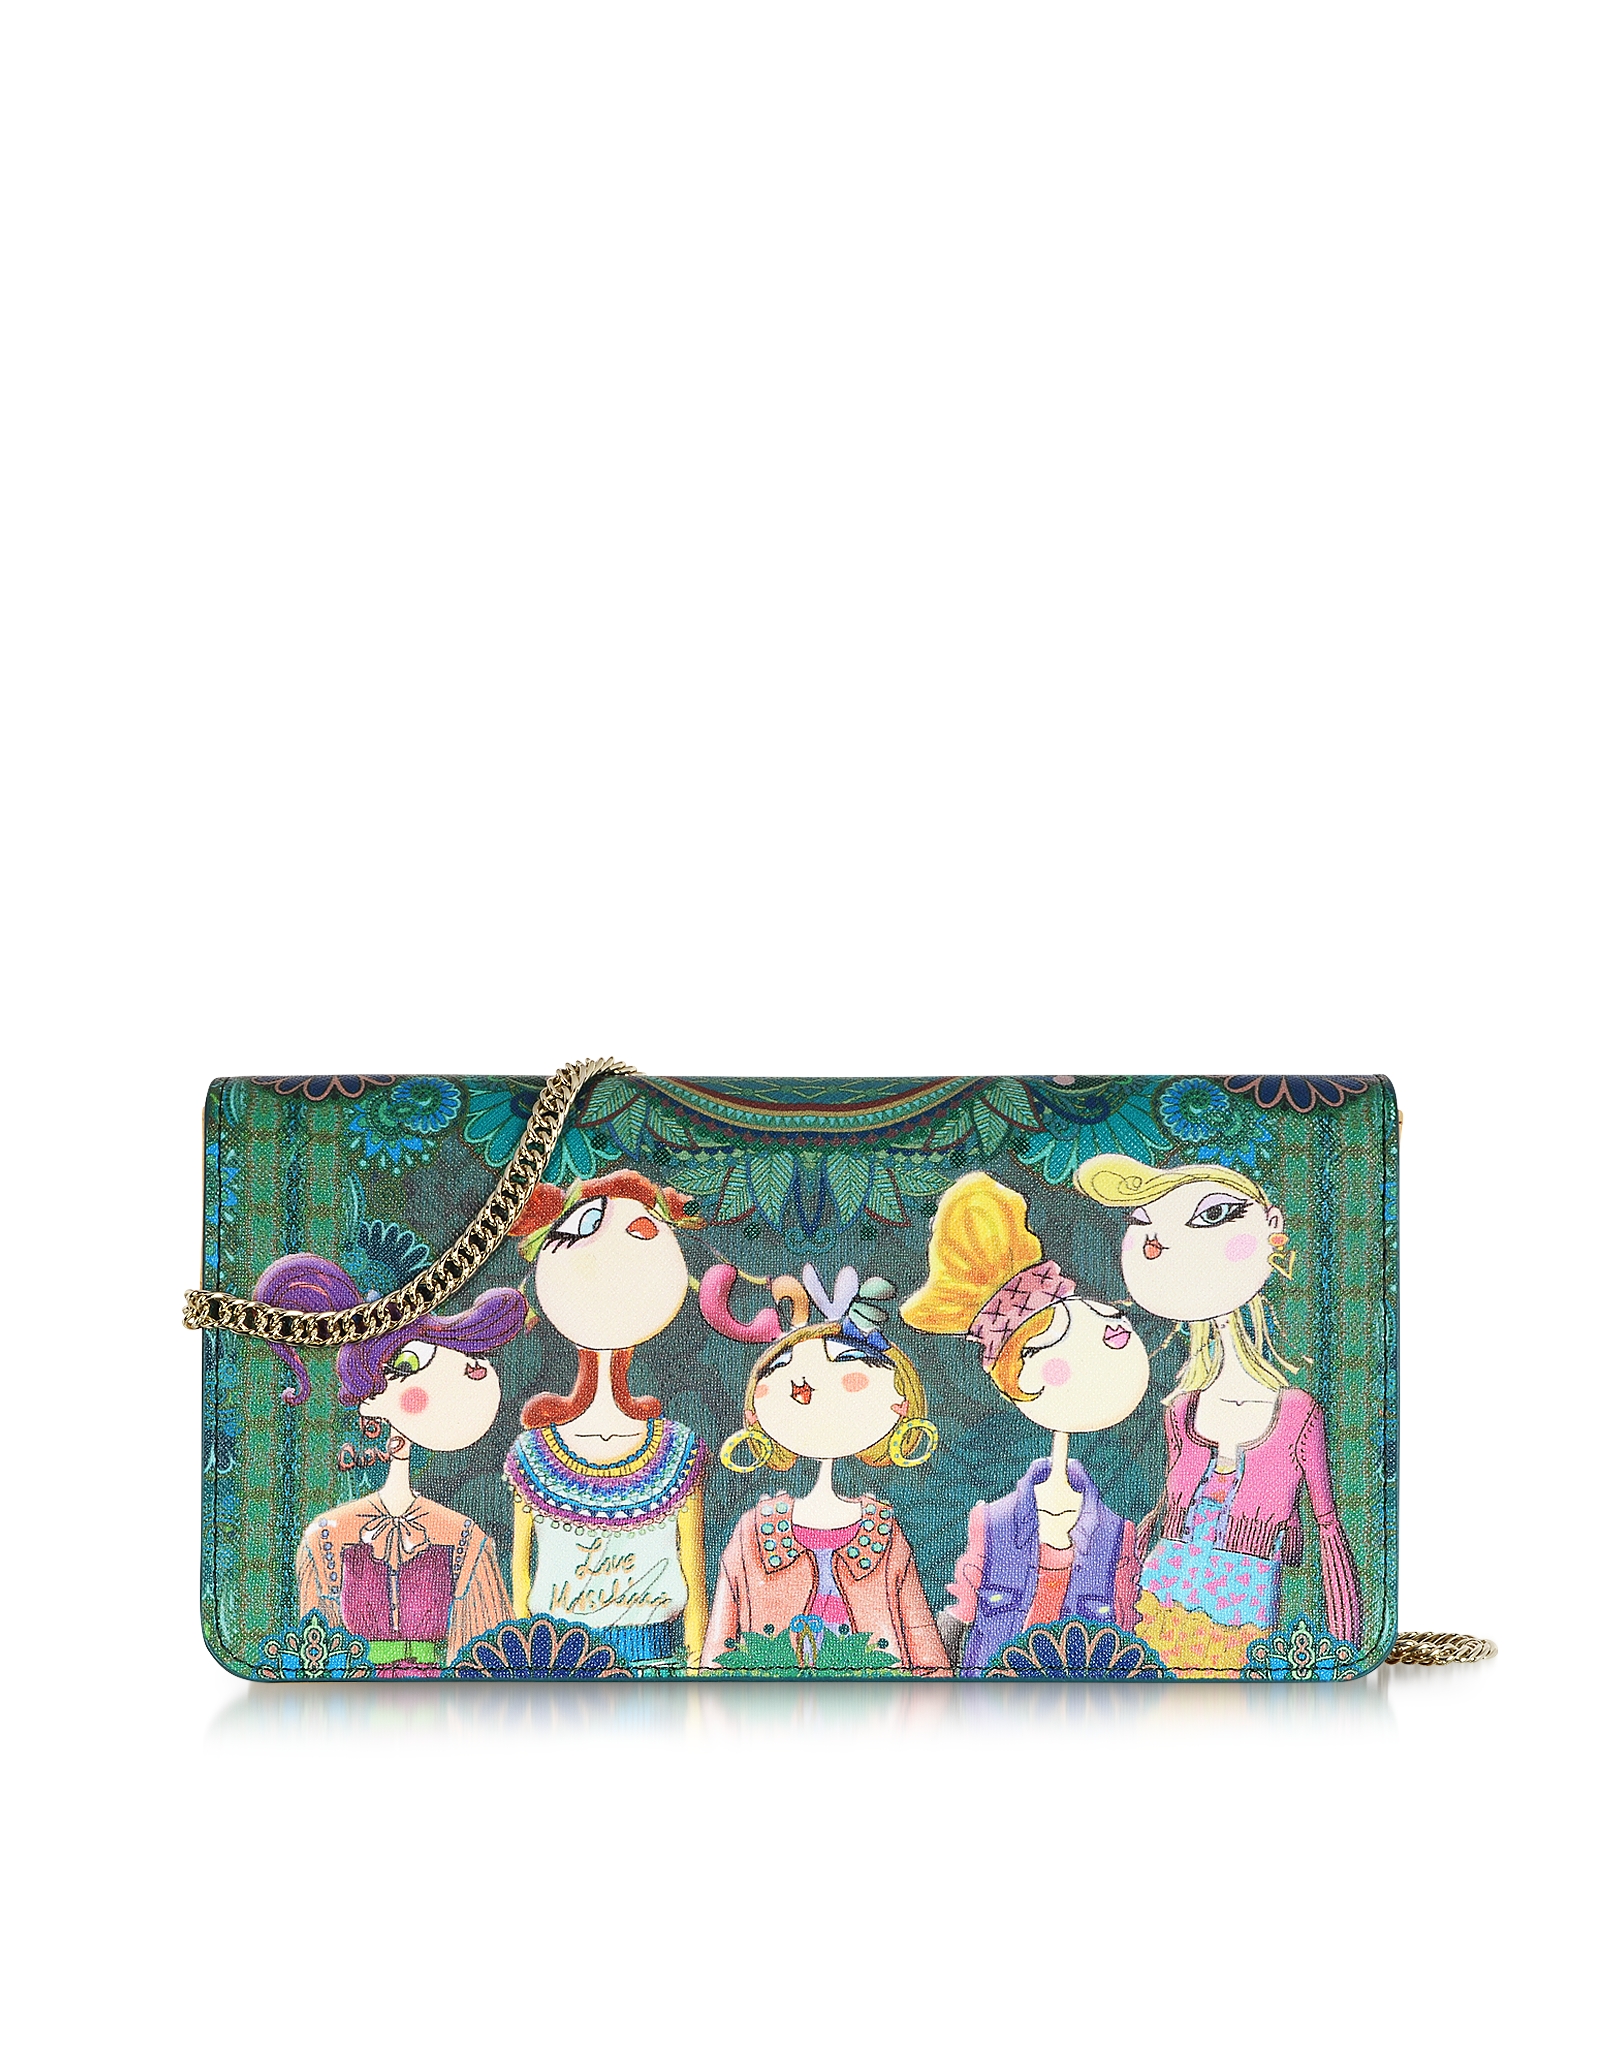 Moschino Charming Printed Eco Leather Wallet Clutch in Multicolor | Lyst